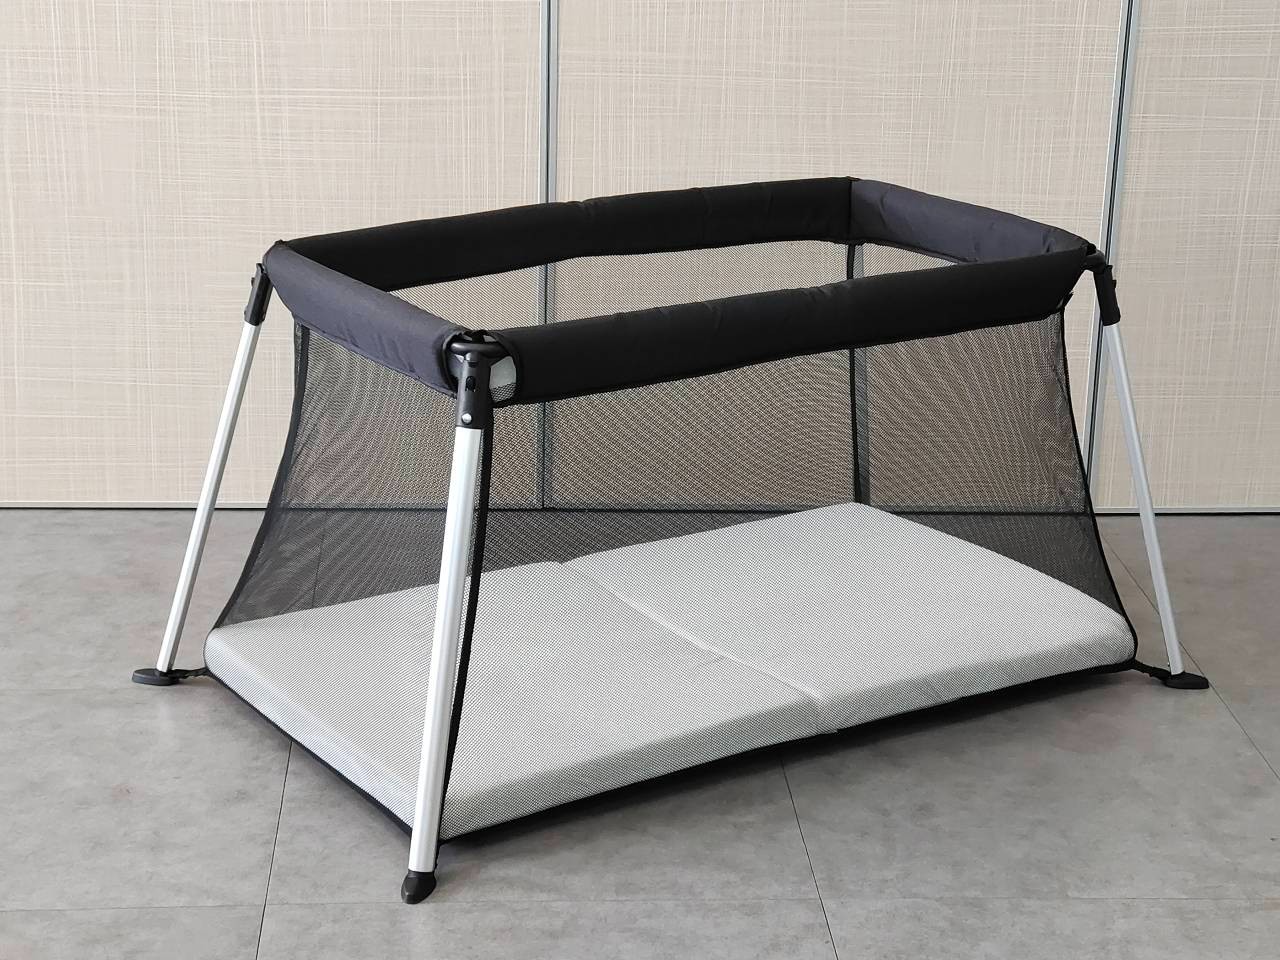 Newborn Baby Travel Cot Baby Crib Portable Child Toddler Cot folded Safety Baby Bed with mattress